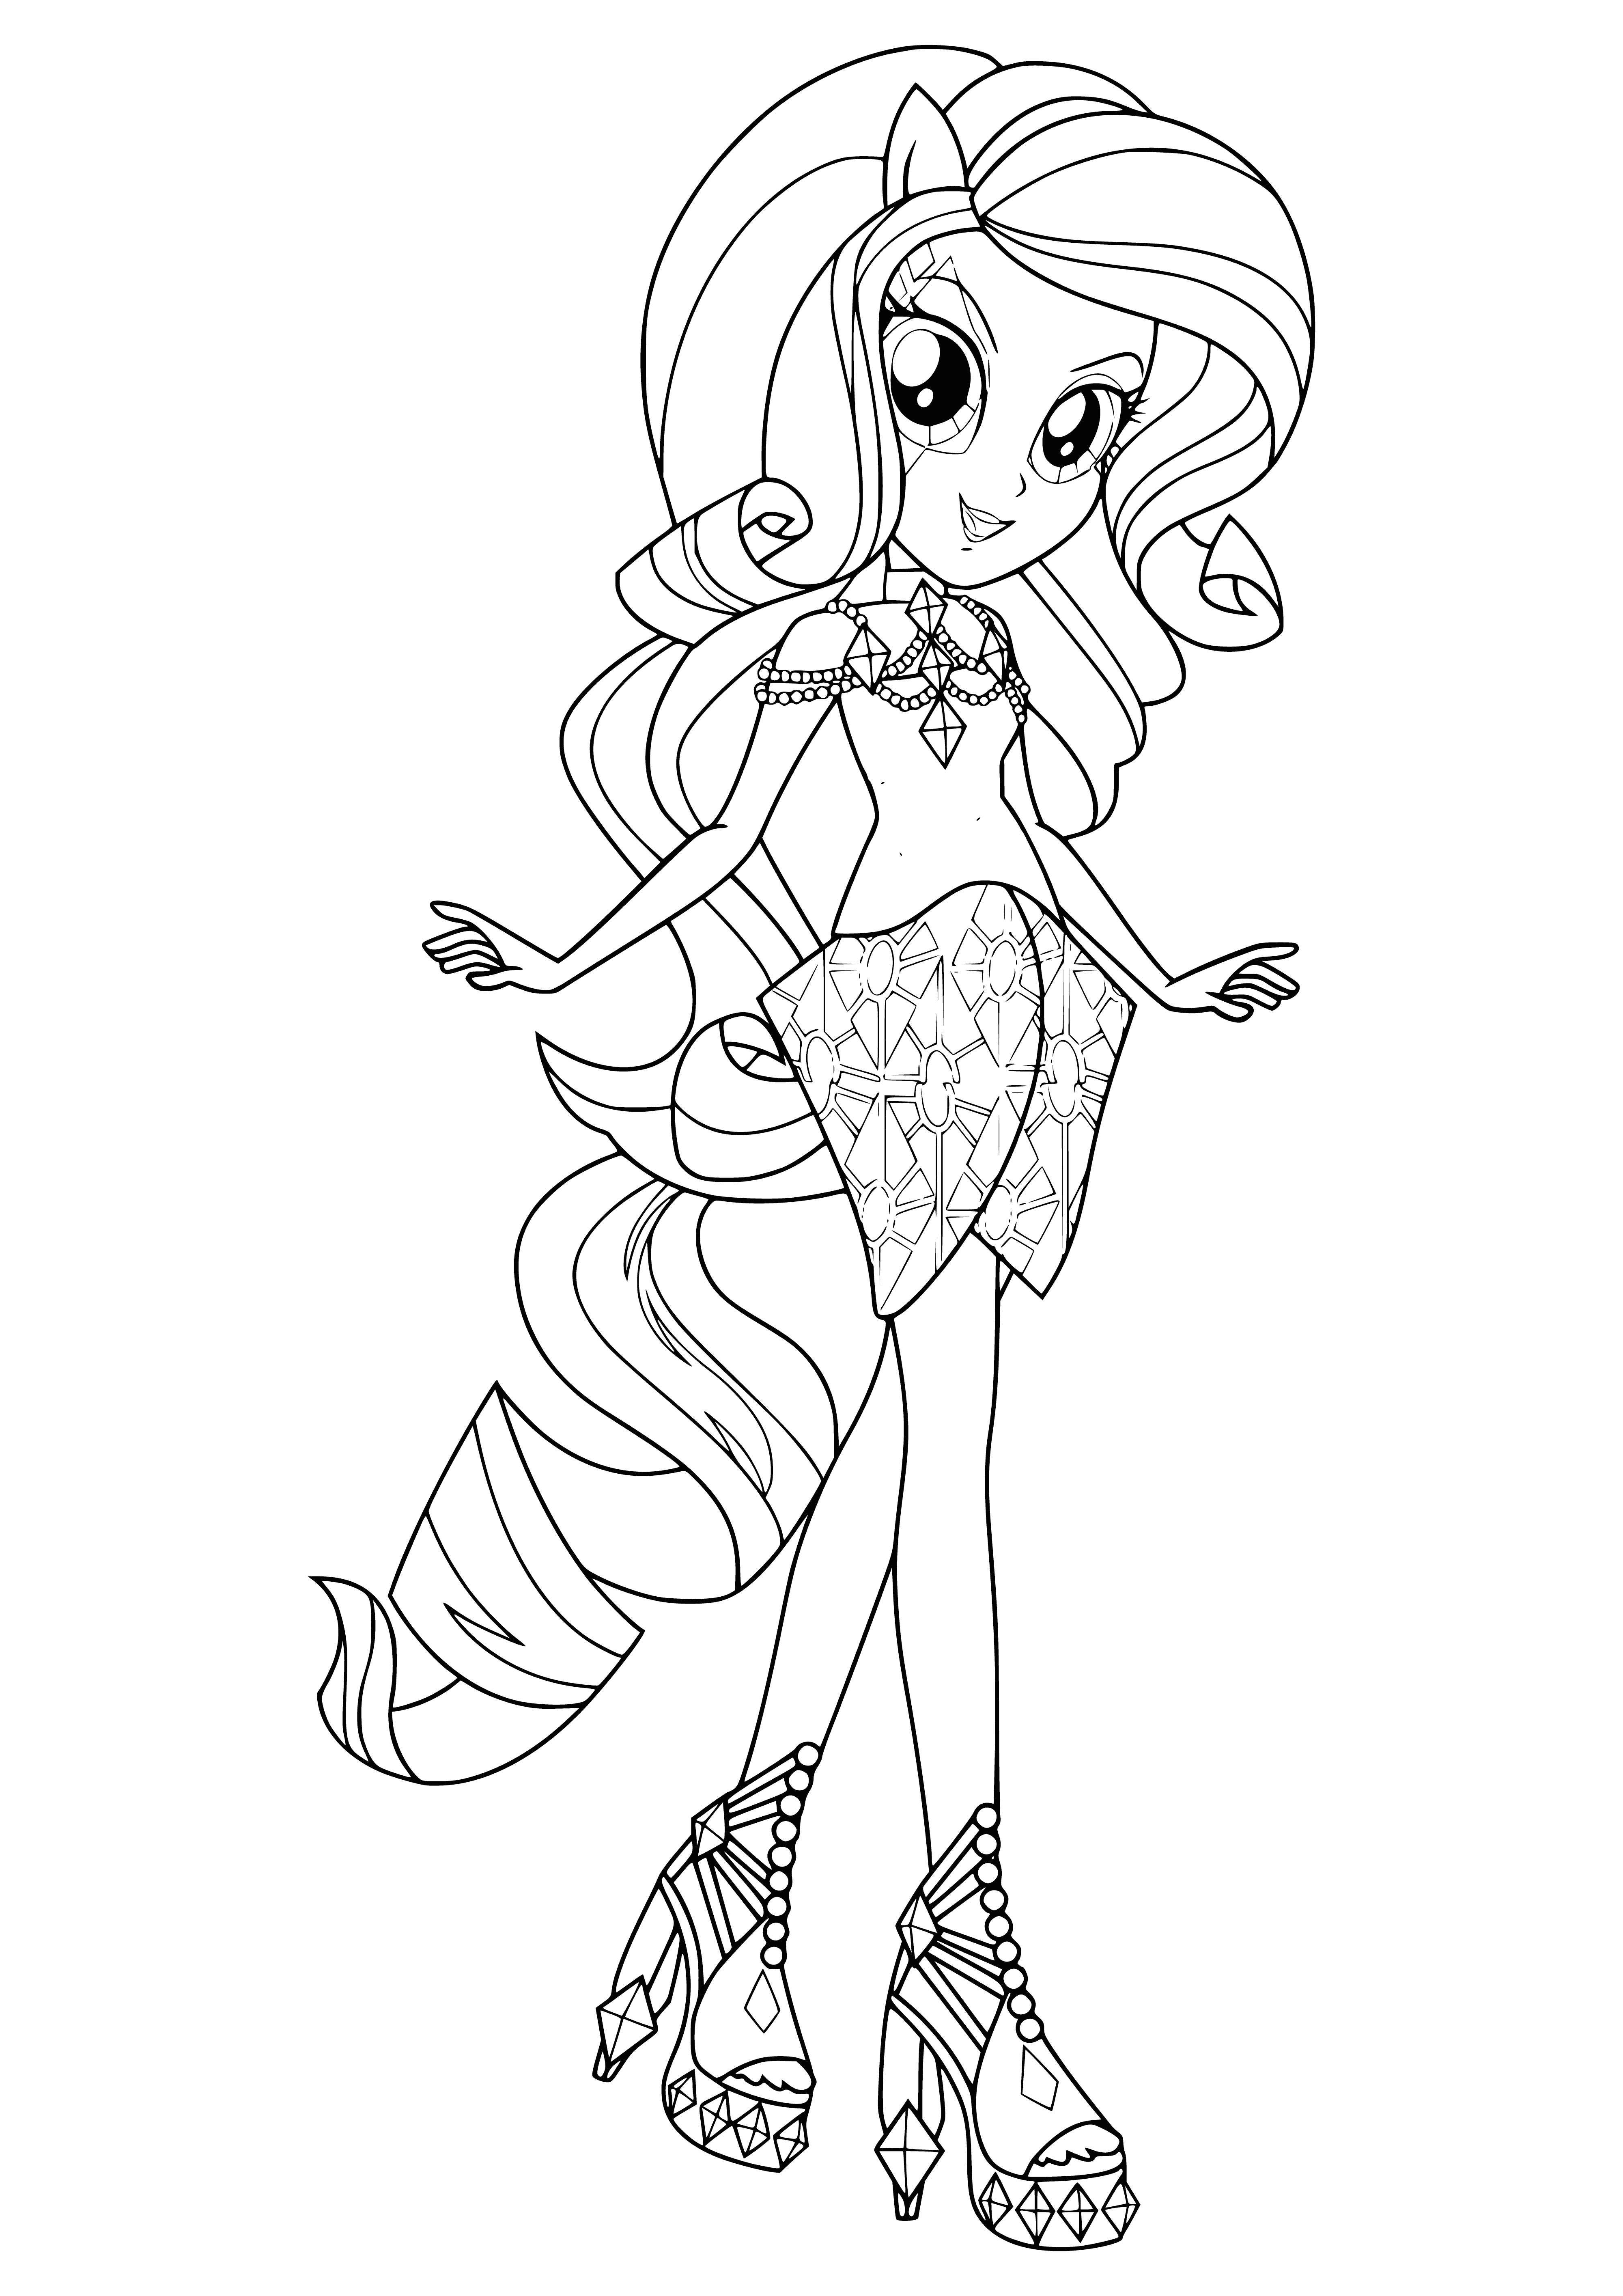 Rarity is a stylish unicorn with blue eyes and long, blue hair wearing a lavender and white outfit and a silver tiara. Carrying a mic, ready to perform!